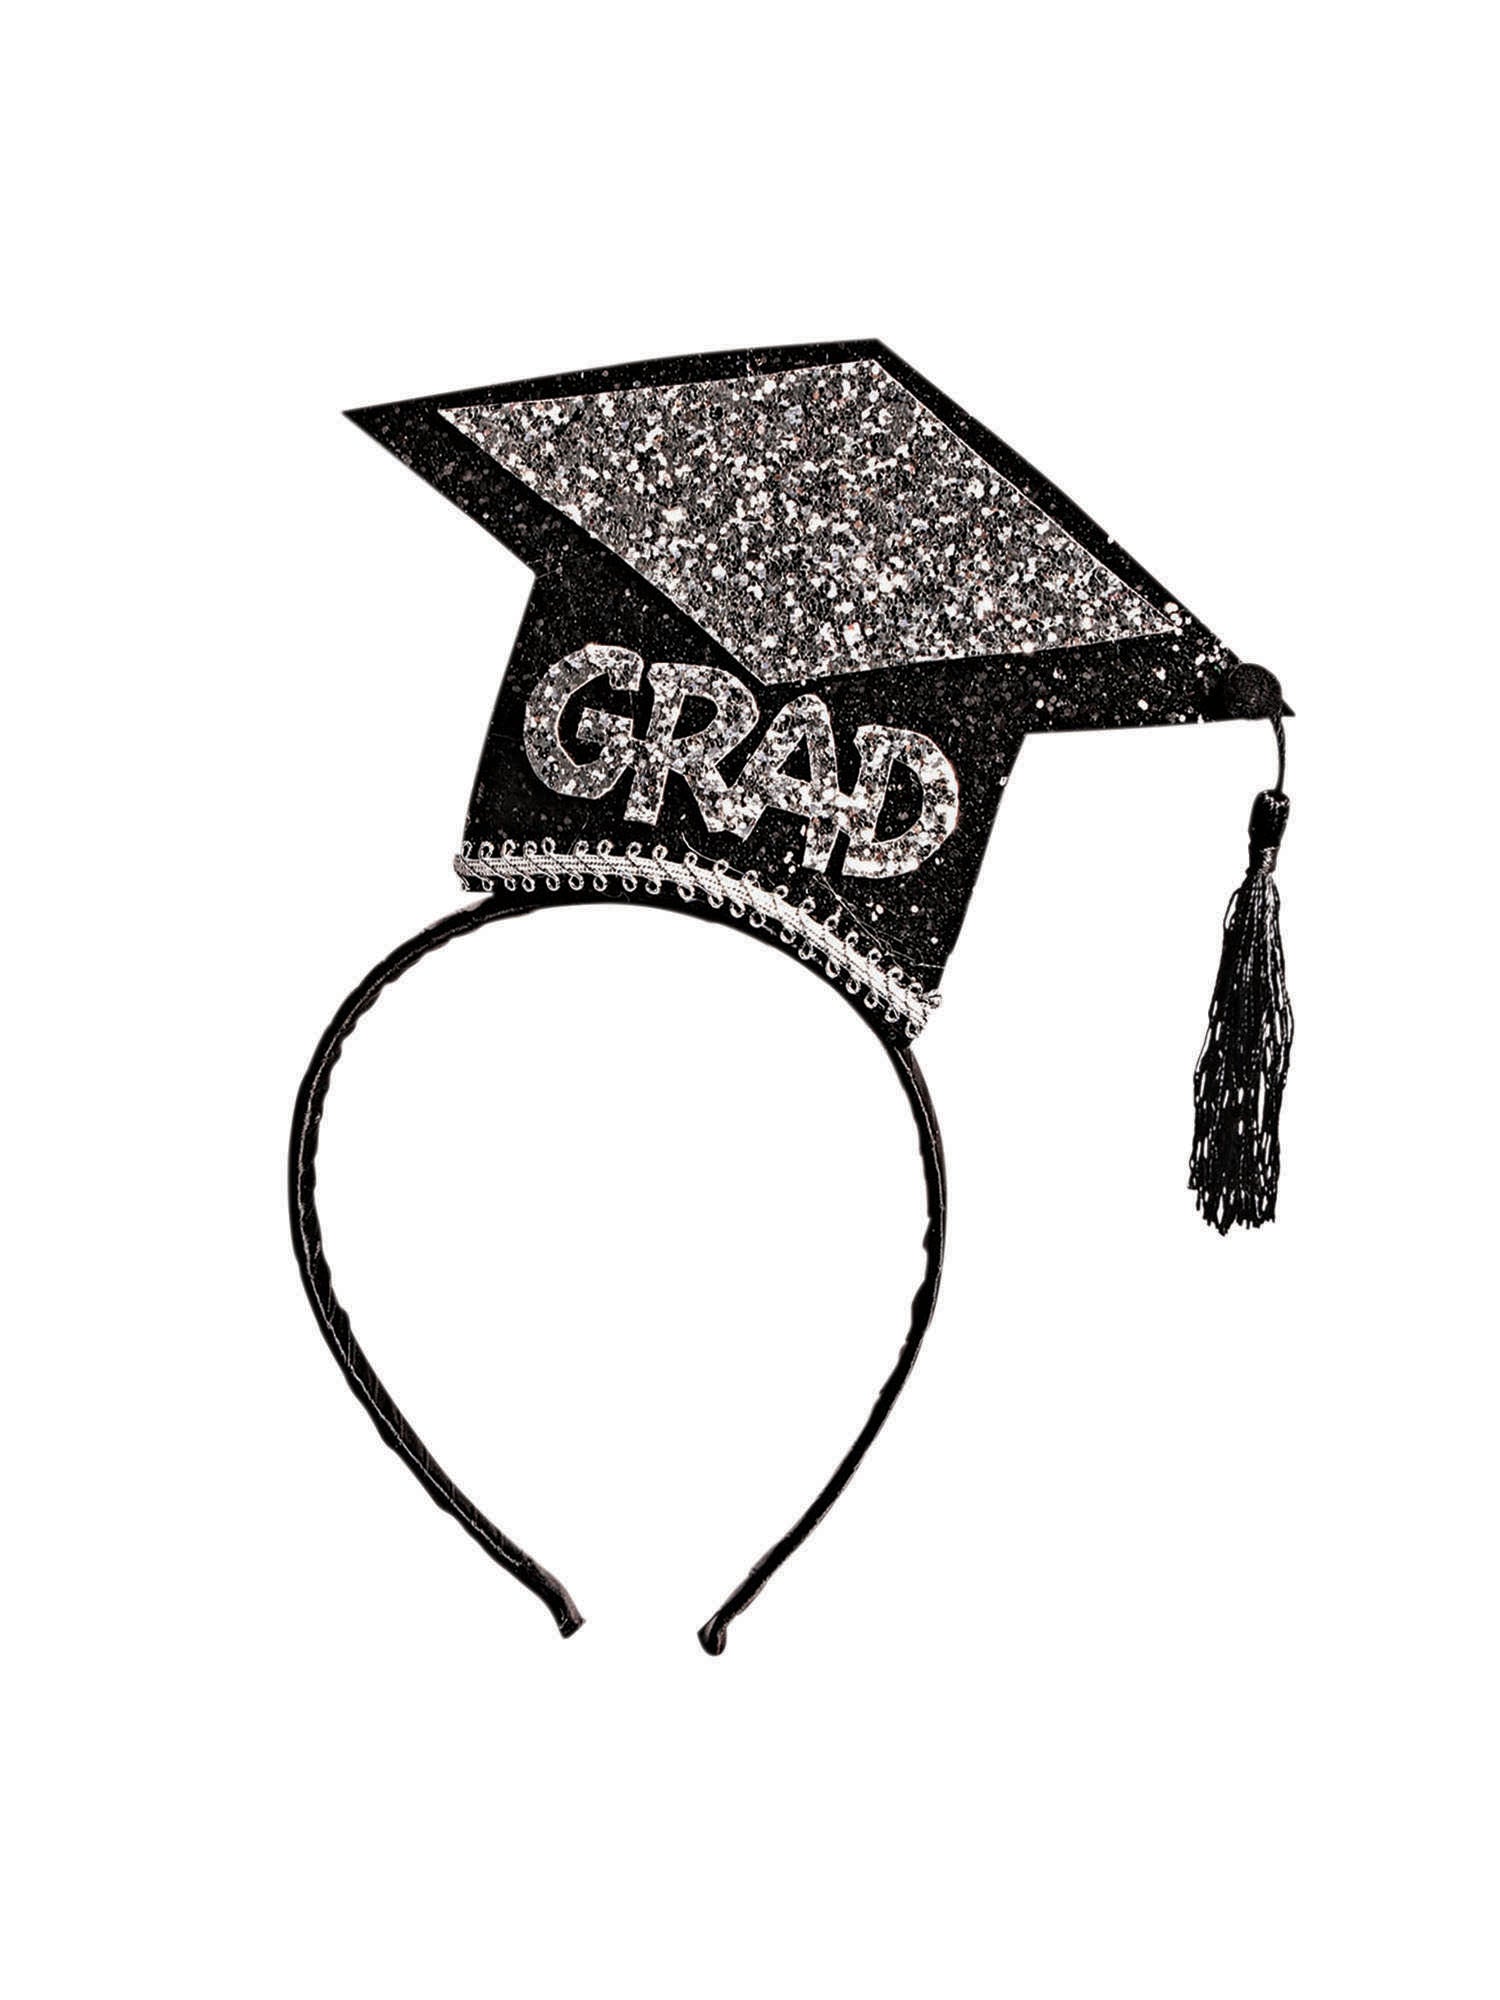 Graduation Hat, multi-colored, Generic, Hats, One Size, Front